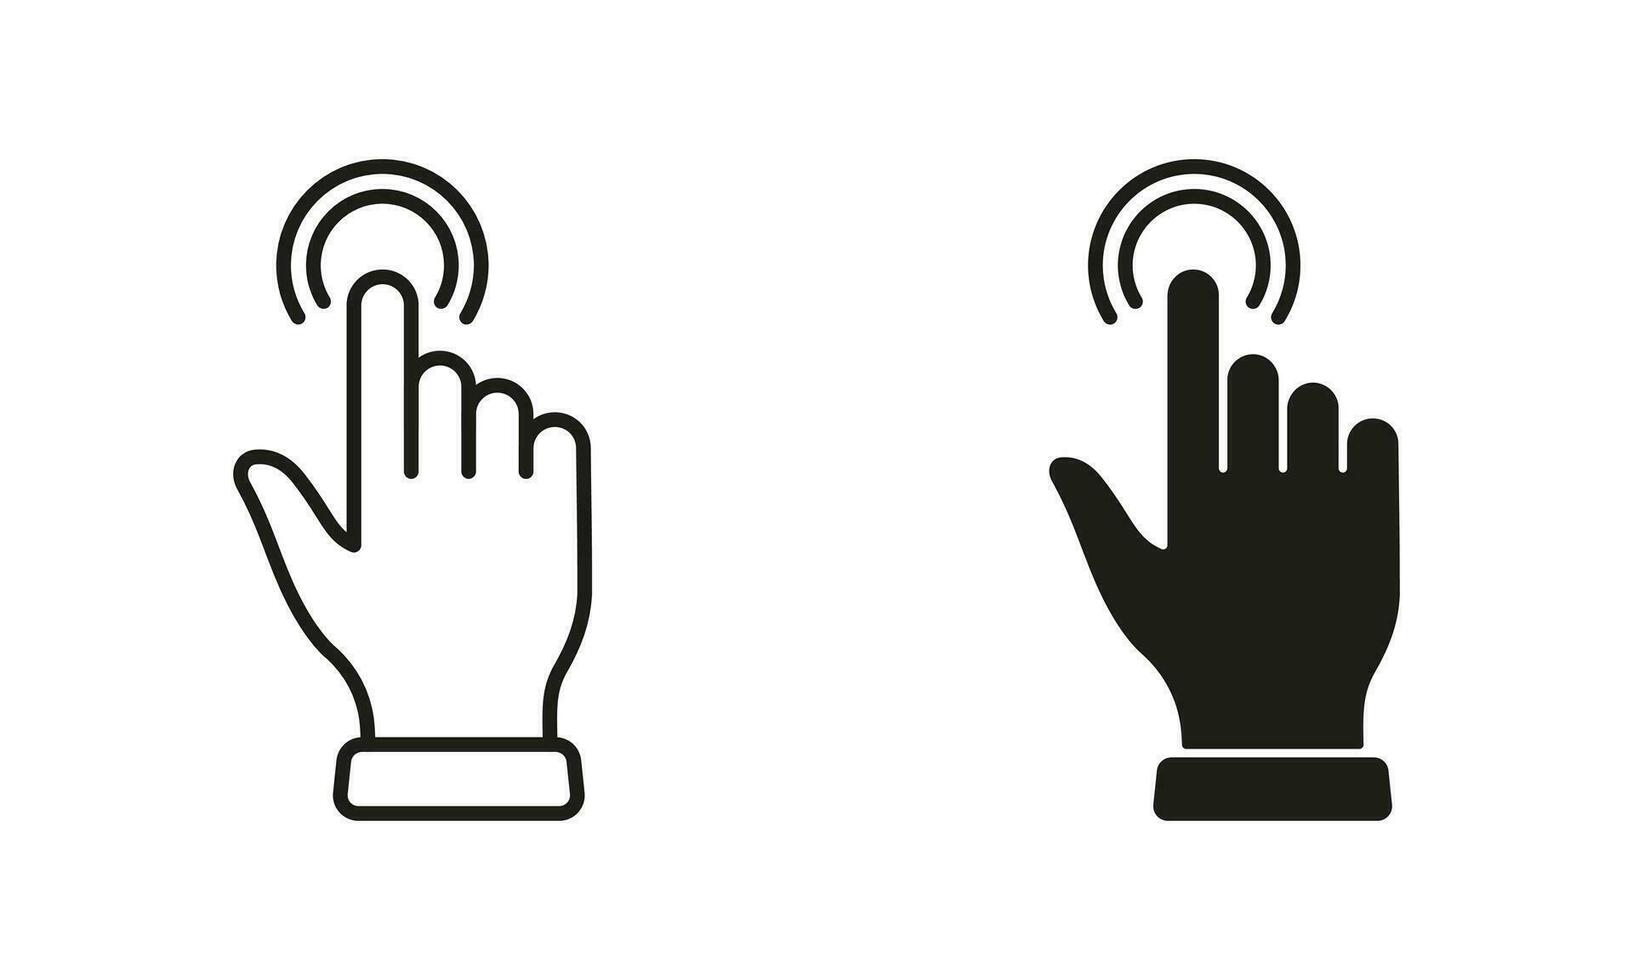 Double Click Gesture, Hand Cursor of Computer Mouse Line and Silhouette Black Icon Set. Pointer Finger Pictogram. Double Press, Swipe, Touch, Point, Tap Sign. Isolated Vector Illustration.